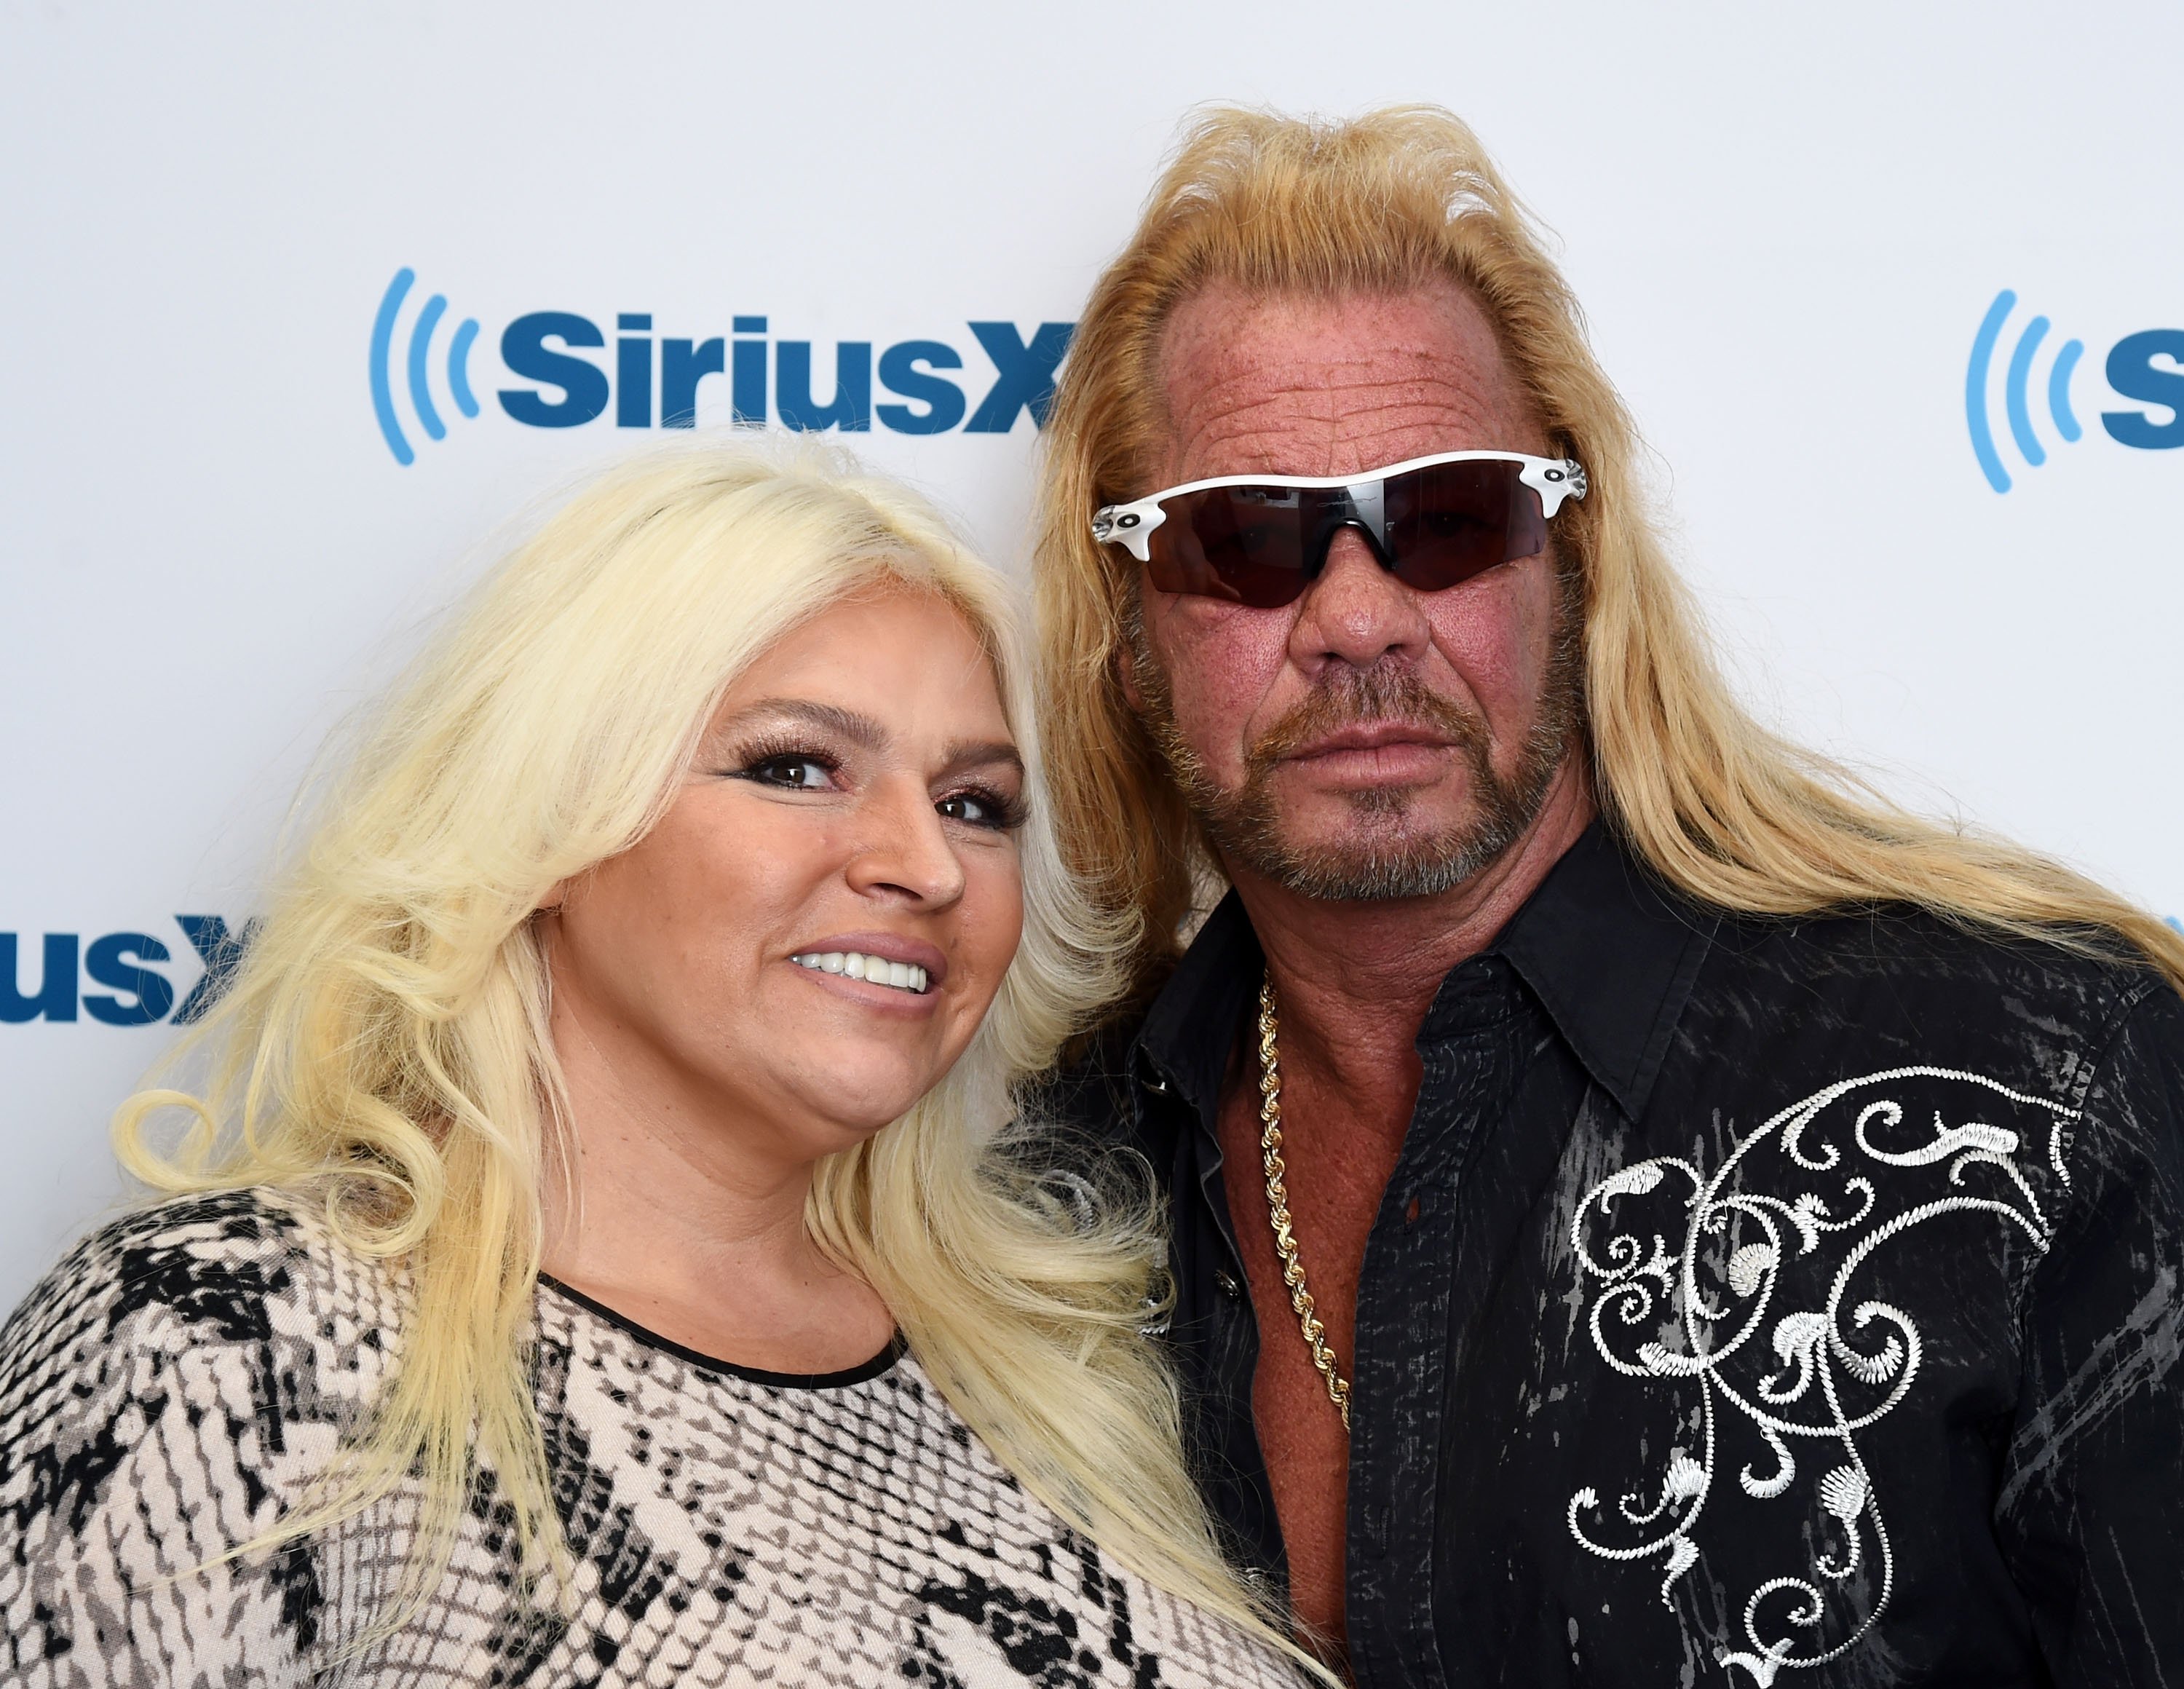 Beth Chapman and Dog the Bounty Hunter, Duane Chapman visits the SiriusXM Studios on April 24, 2015, in New York City. | Source: Getty Images.